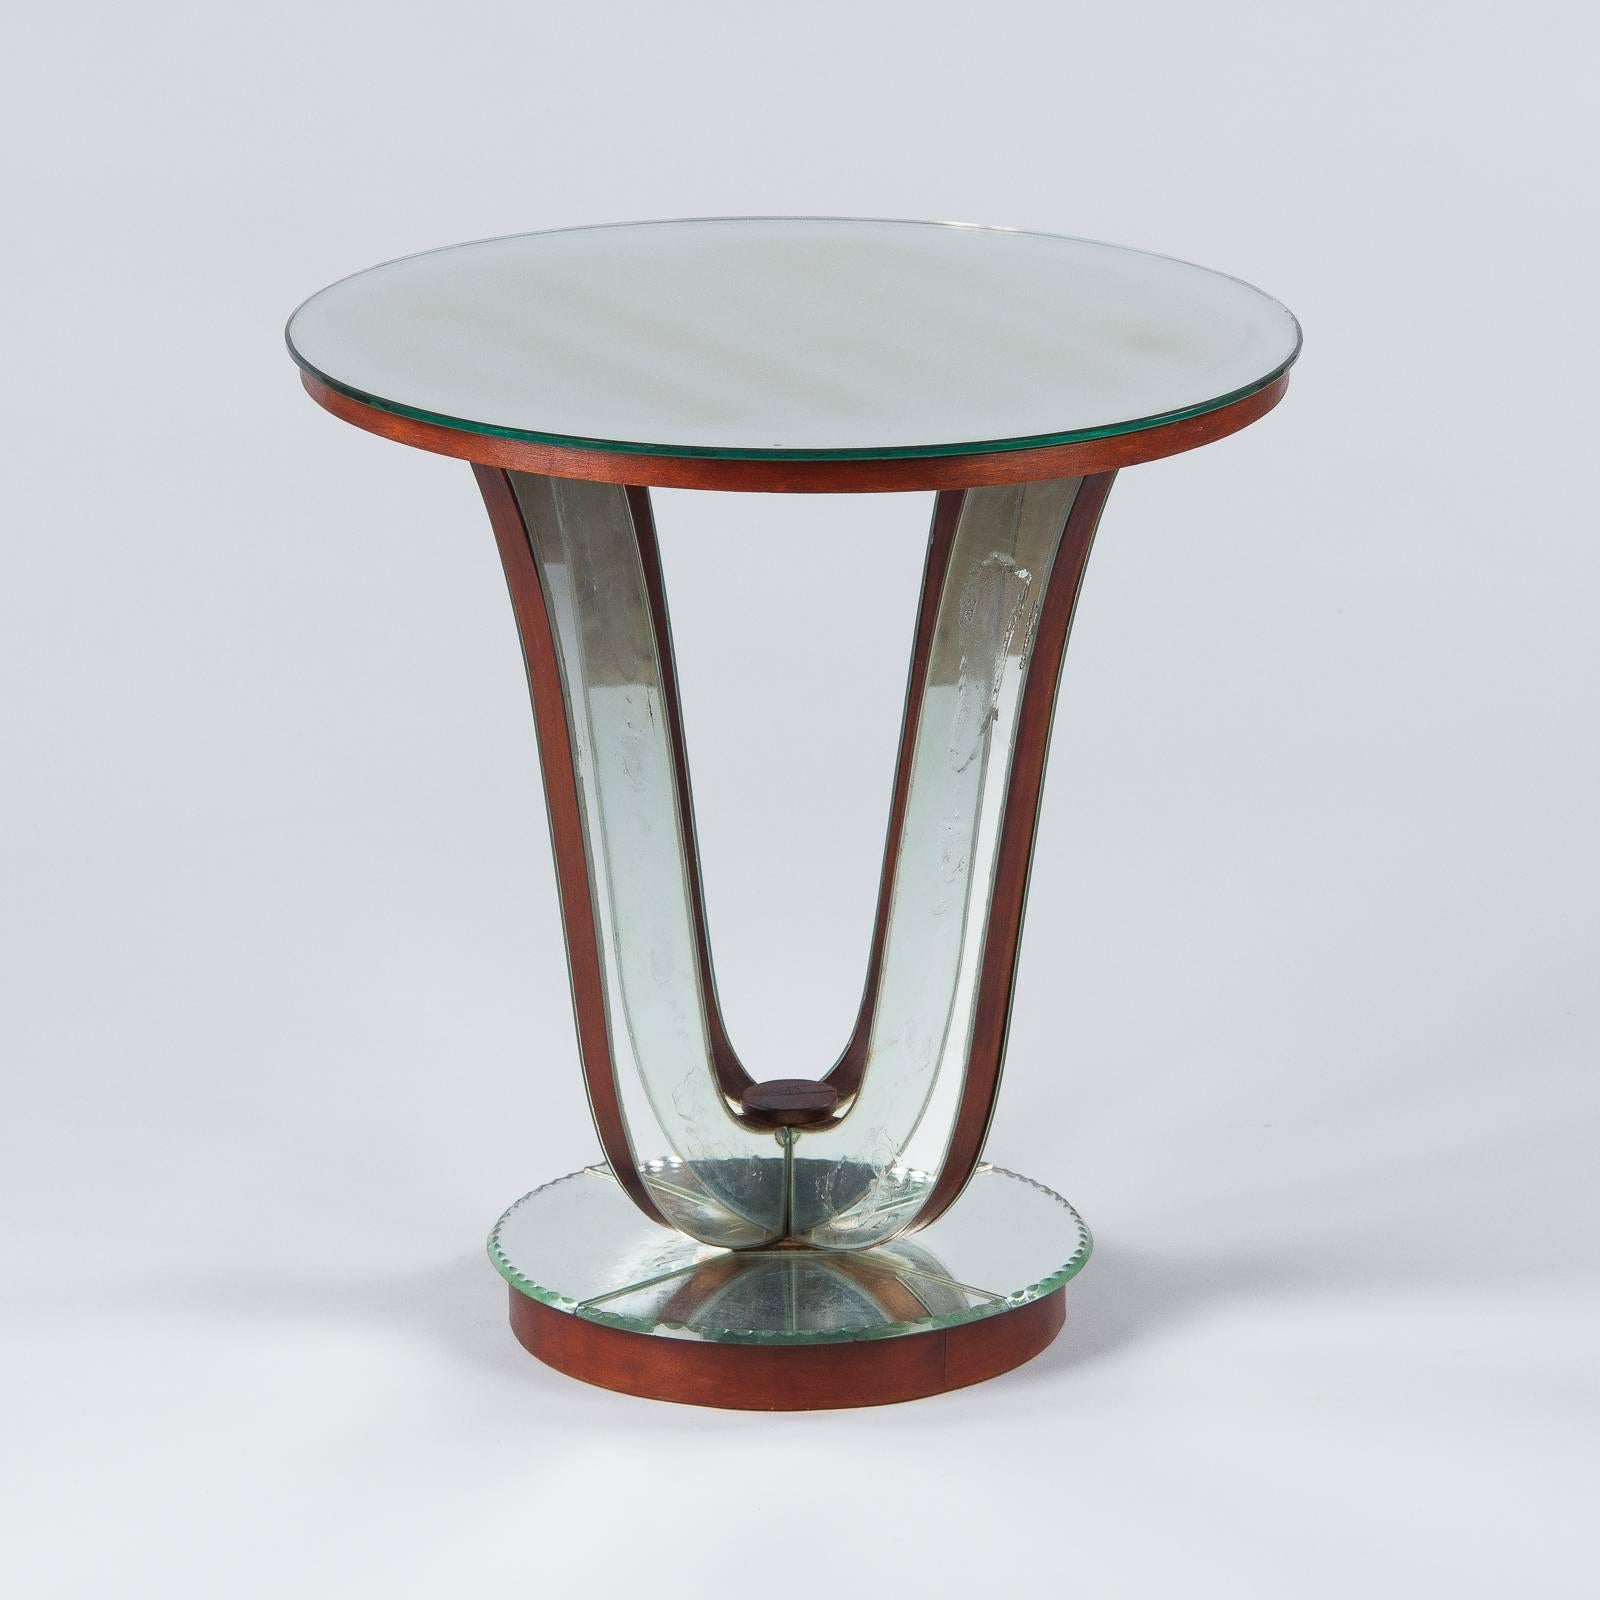 20th Century Midcentury Mirrored Venetian Glass Side Table, France, 1950s